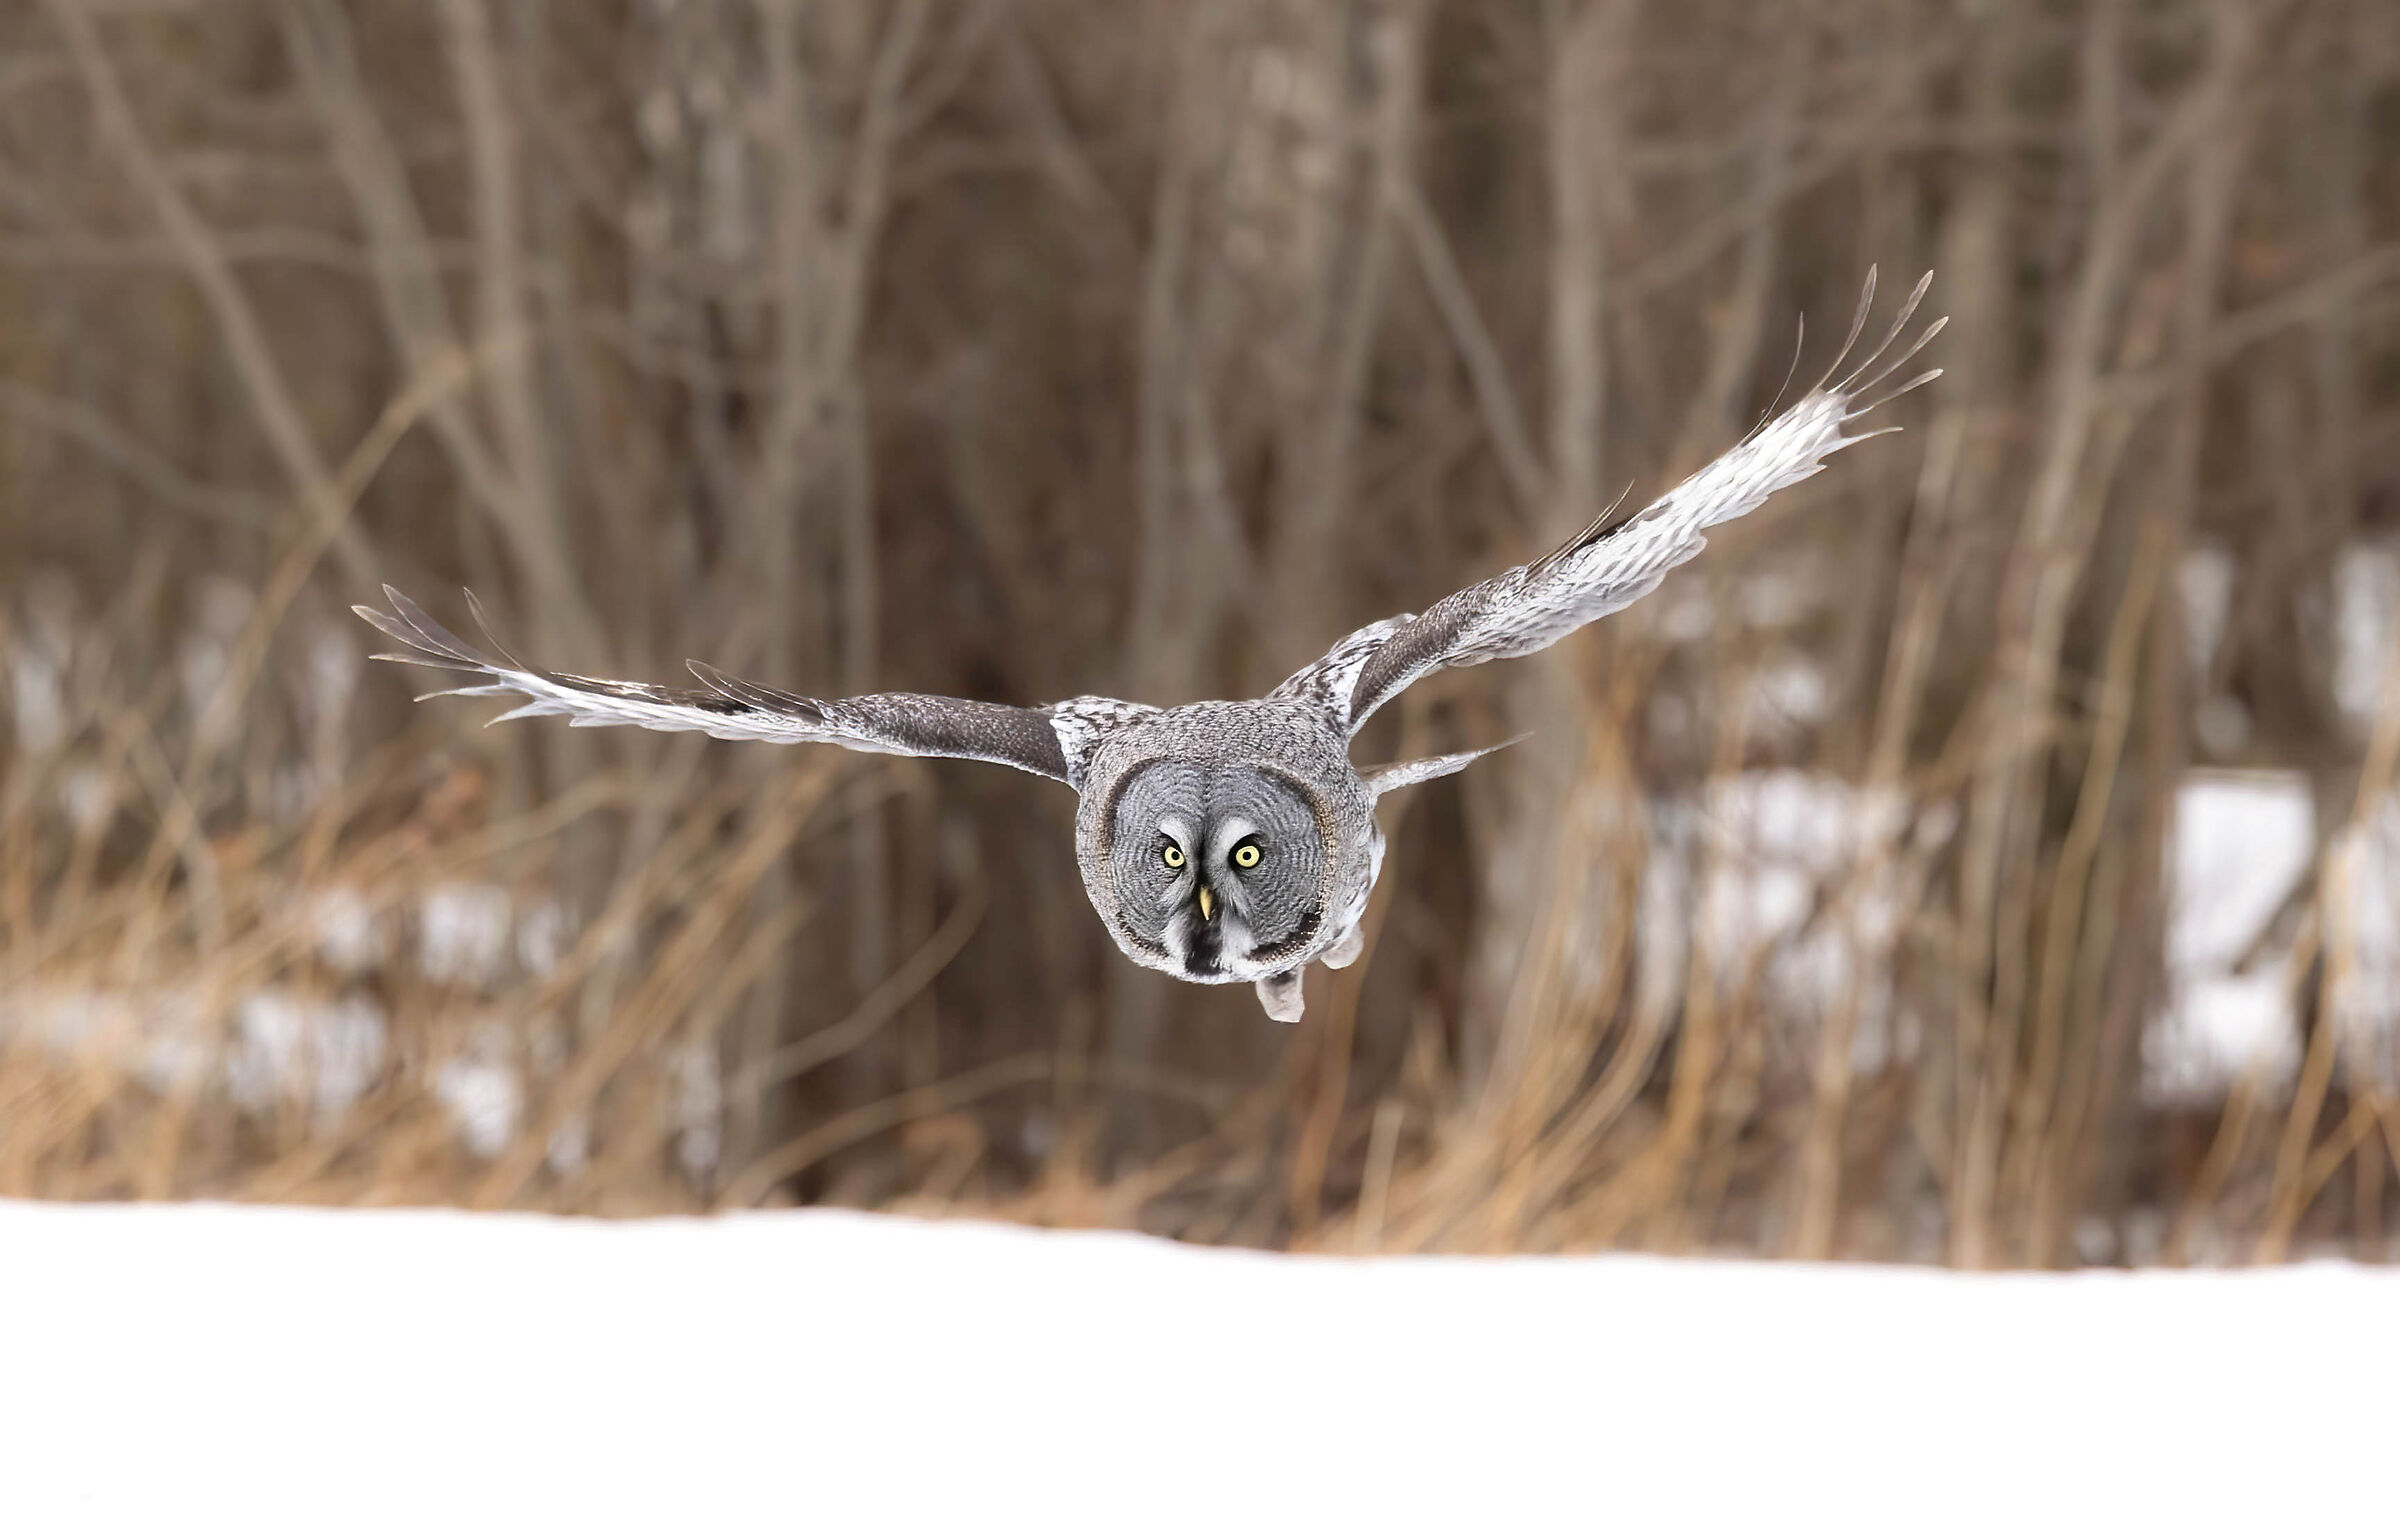 The silent glide of the Lapland owl...